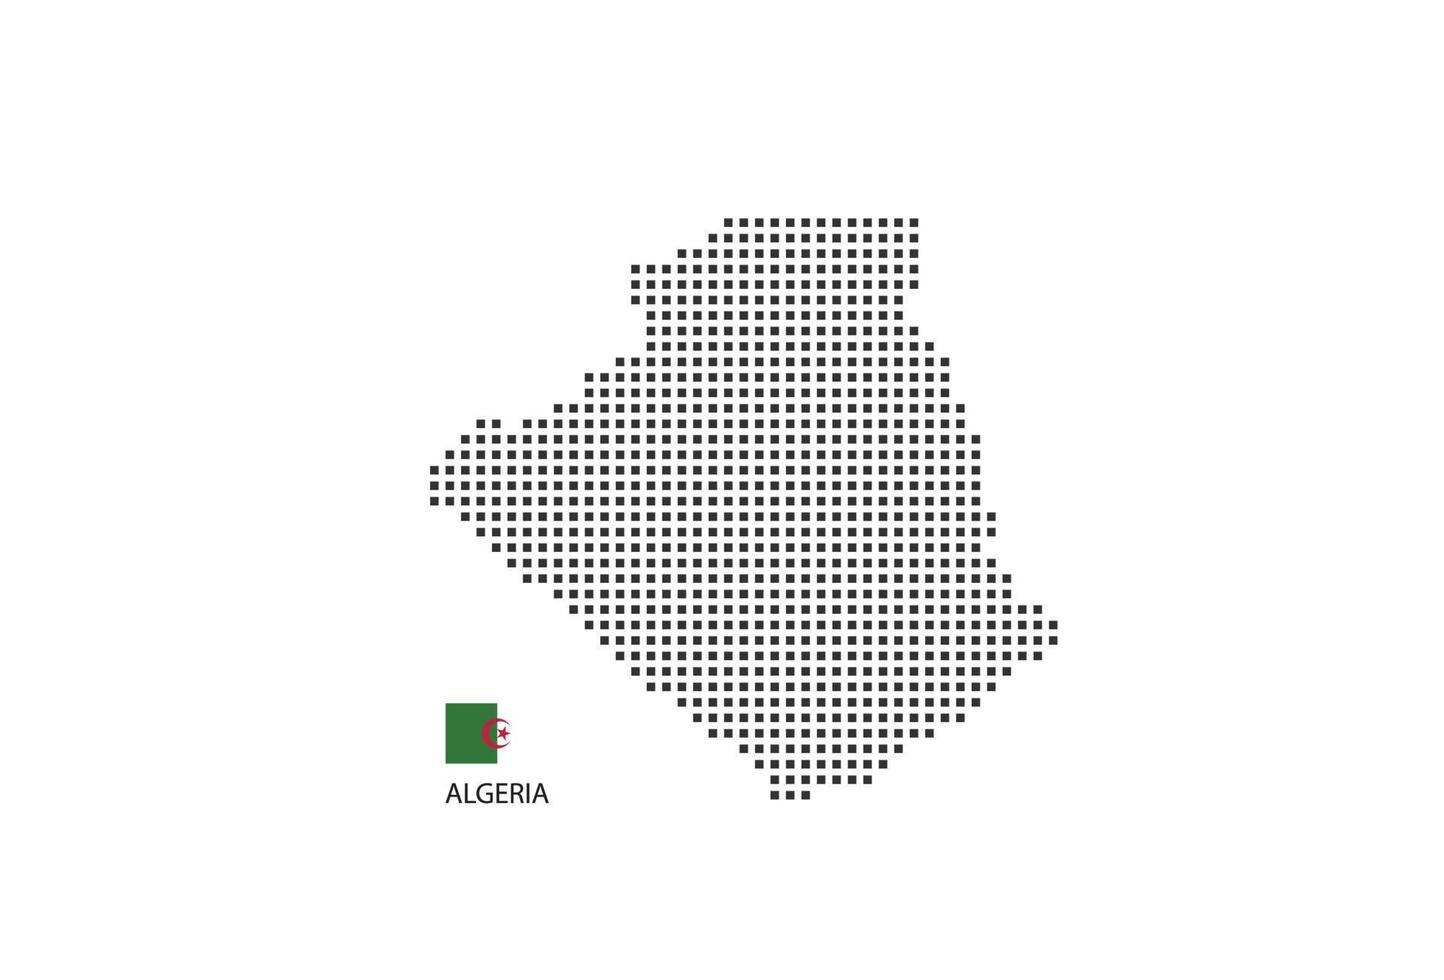 Vector square pixel dotted map of Algeria isolated on white background with Algeria flag.